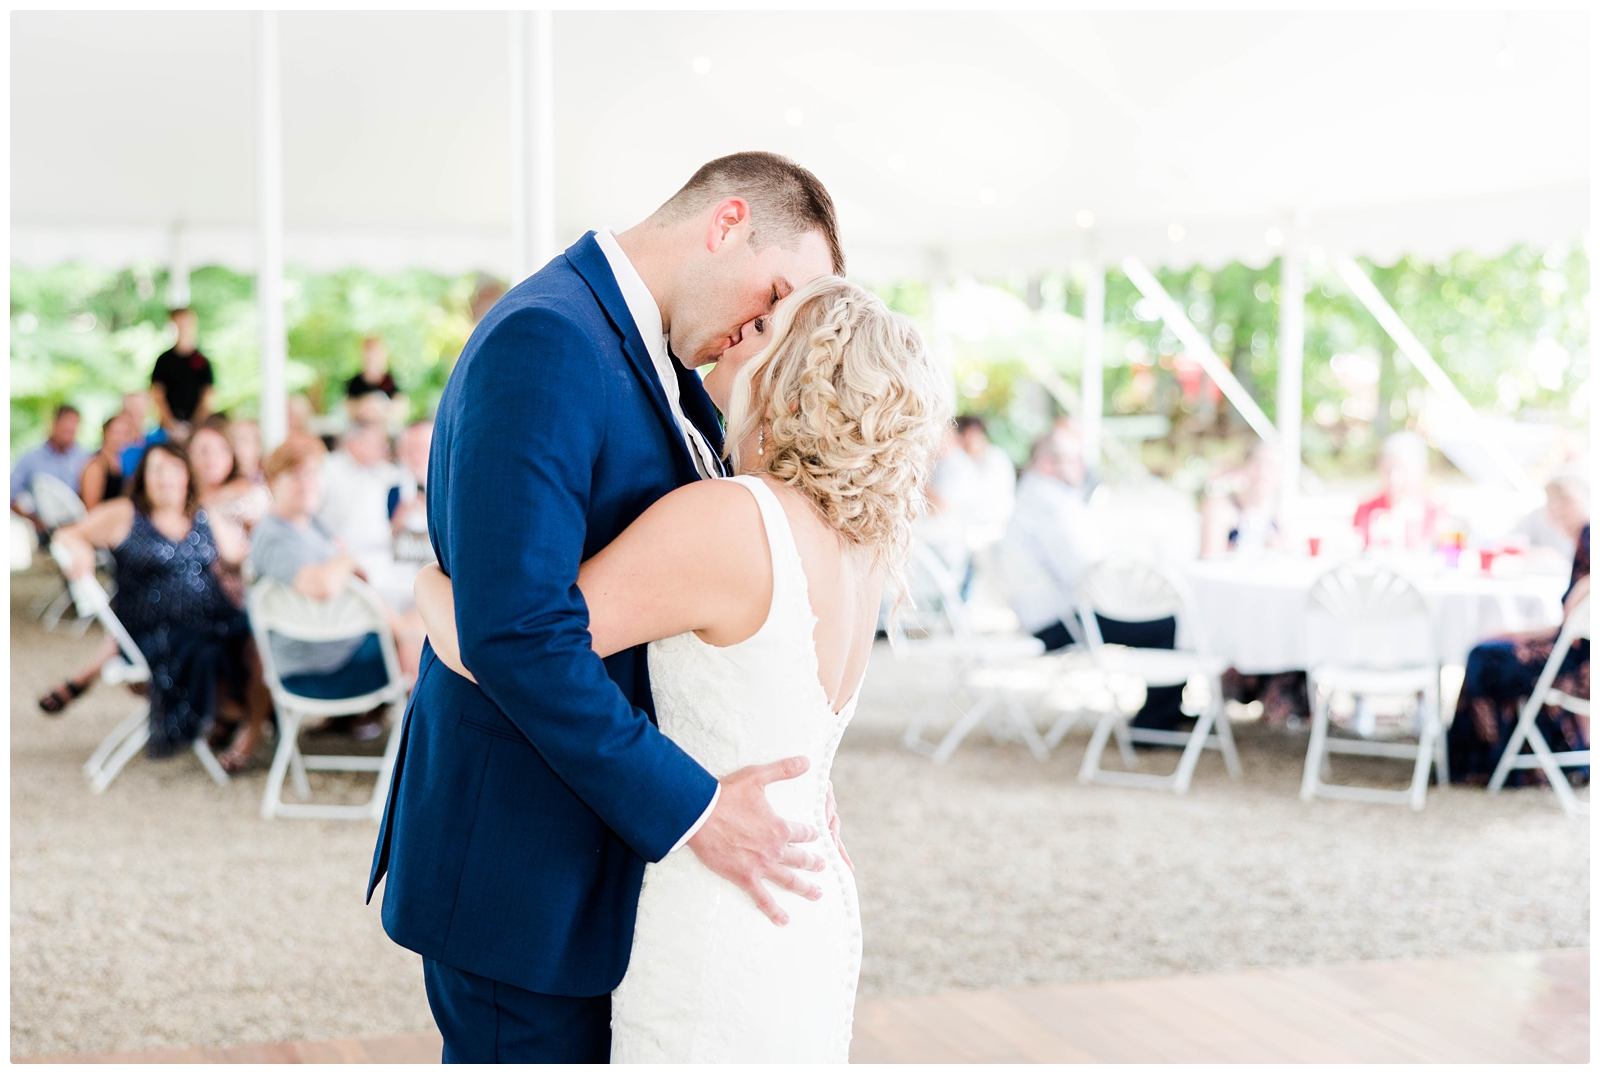 bride and groom first dance at wedding reception under tent